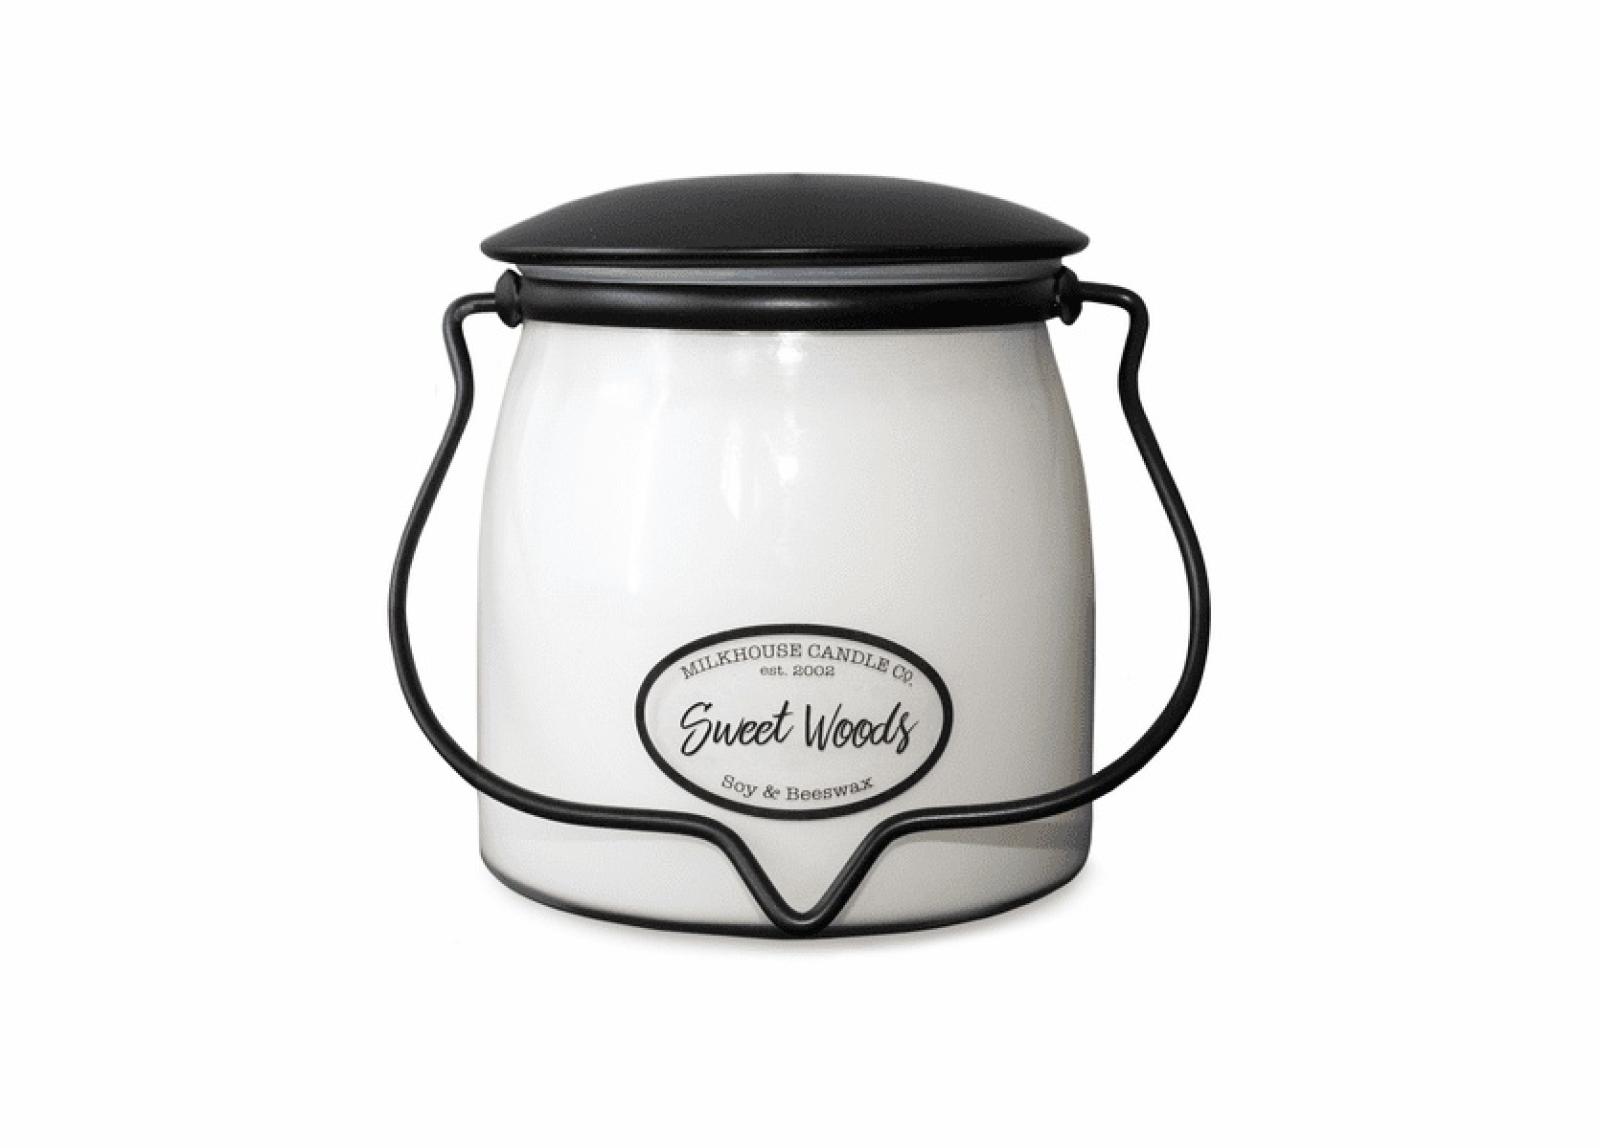 Milkhouse Sweet Woods Butter Jar Candle